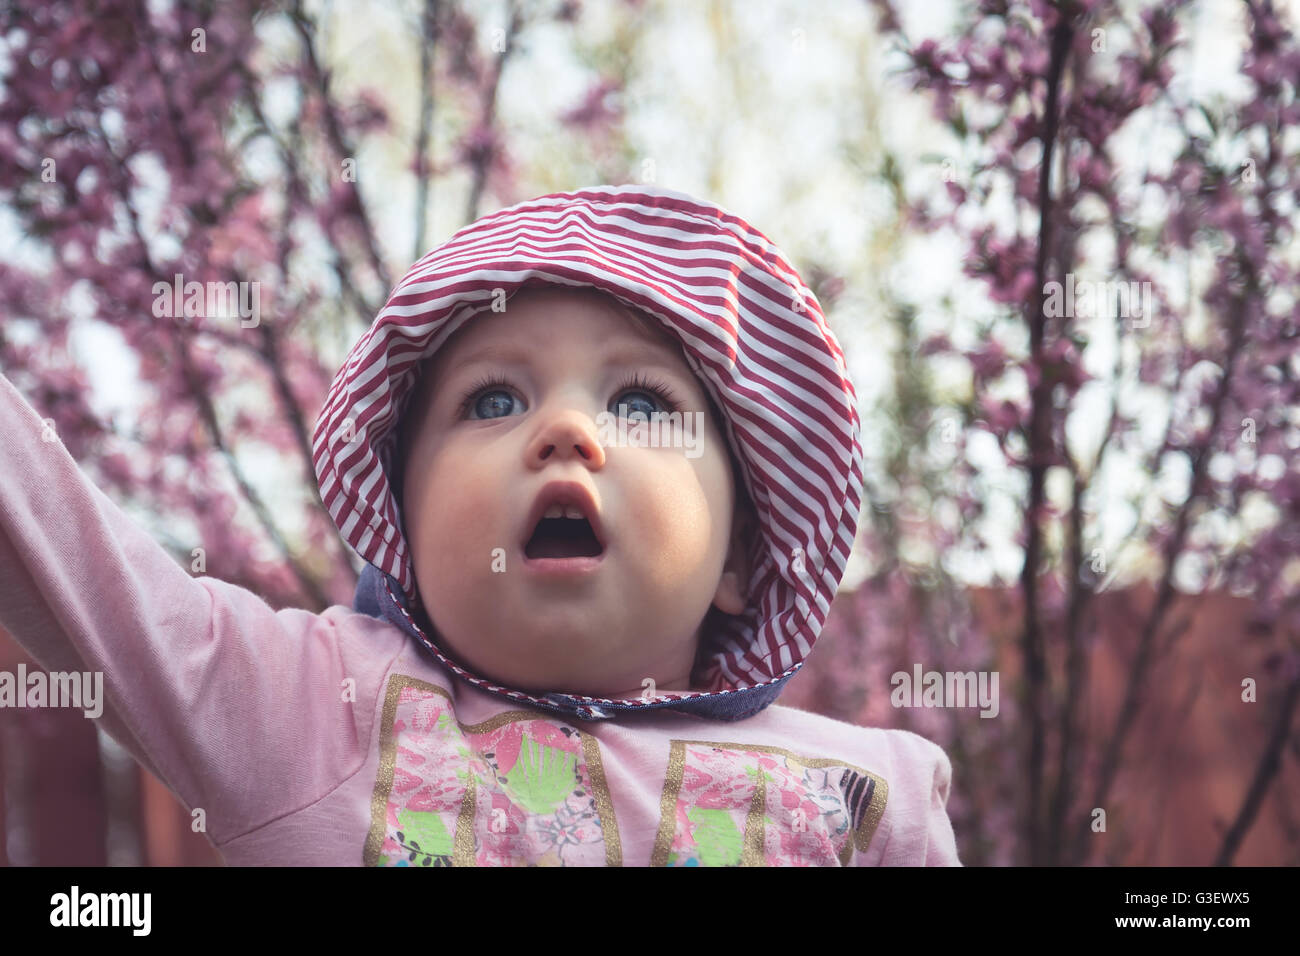 Admiring cute baby girl in pink clothes walking among blossoming ...